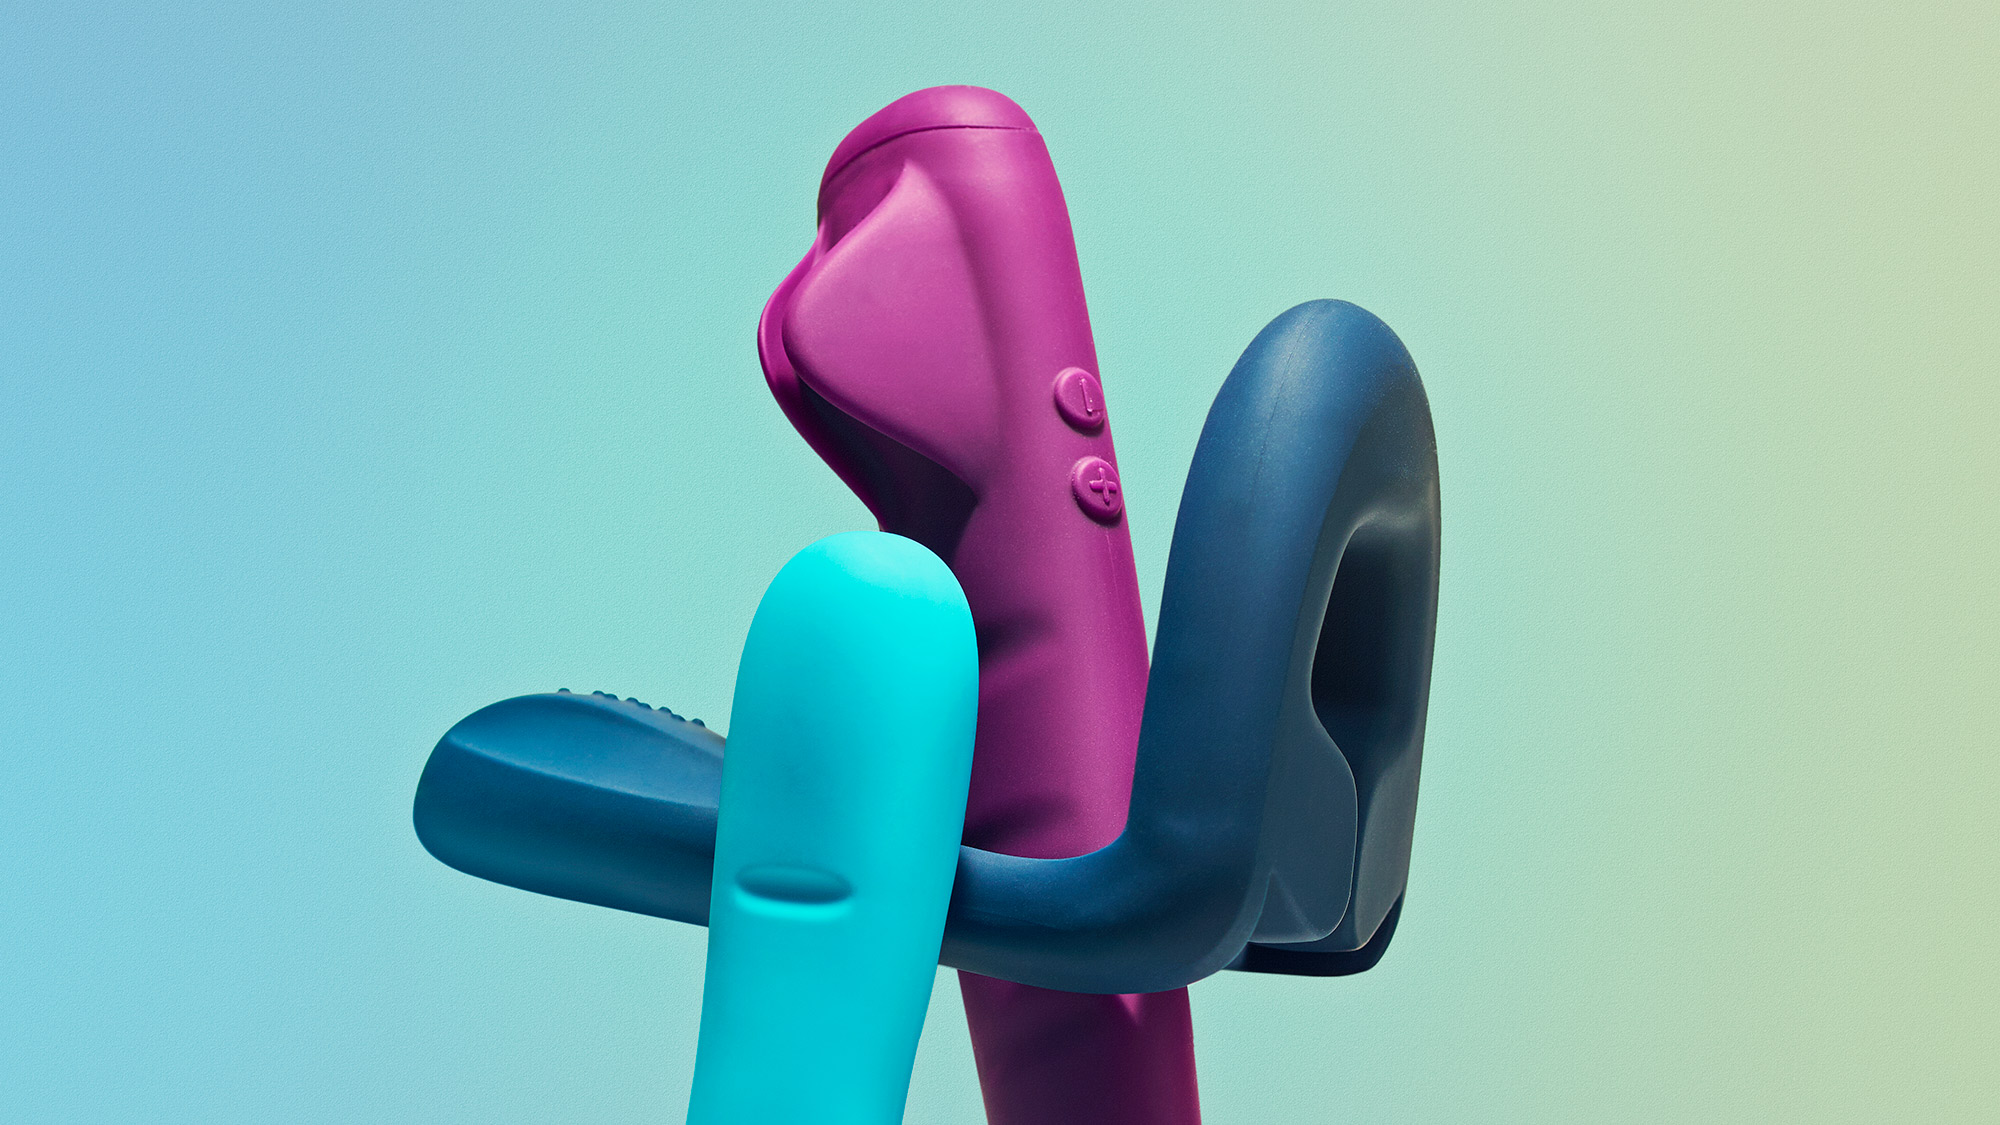 Sex toys engineered to be medical devices Popular Science image image